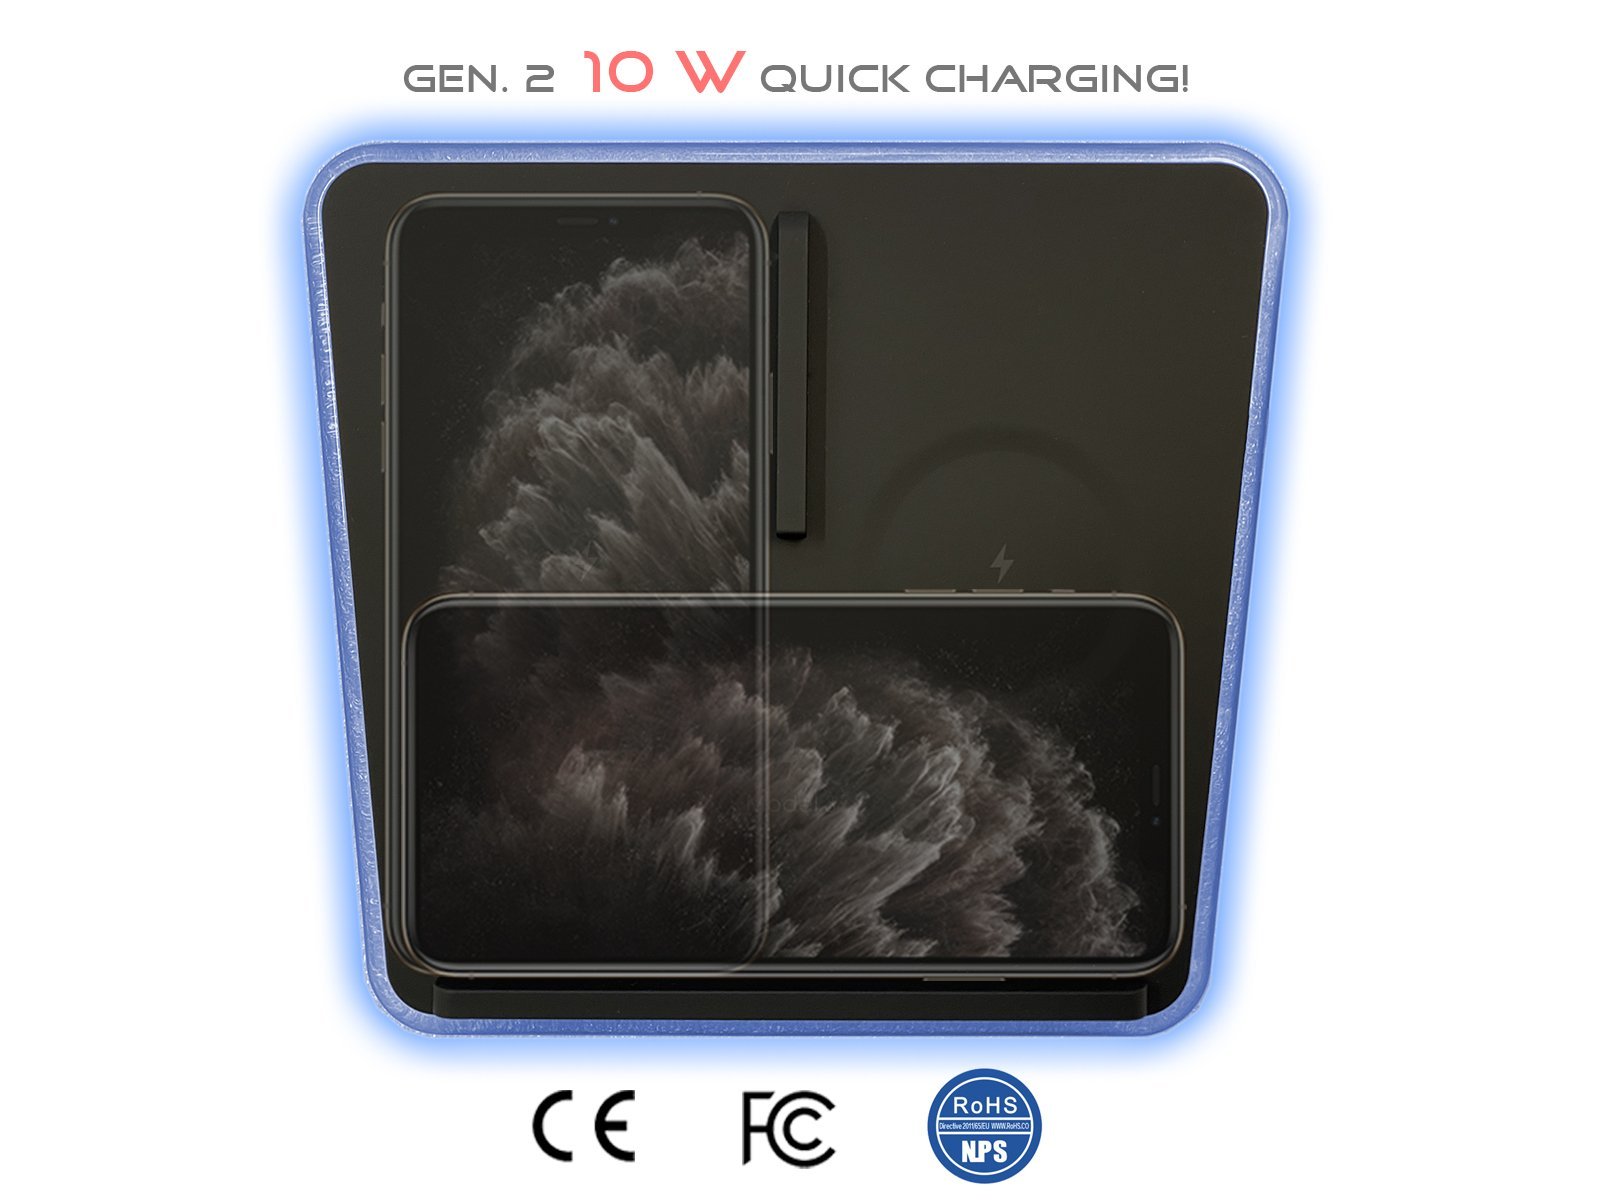 Model 3/Y: Gen. 2 Wireless Mobile Quick Charging Pad (CE, FCC, RoHS certified) - Torque Alliance